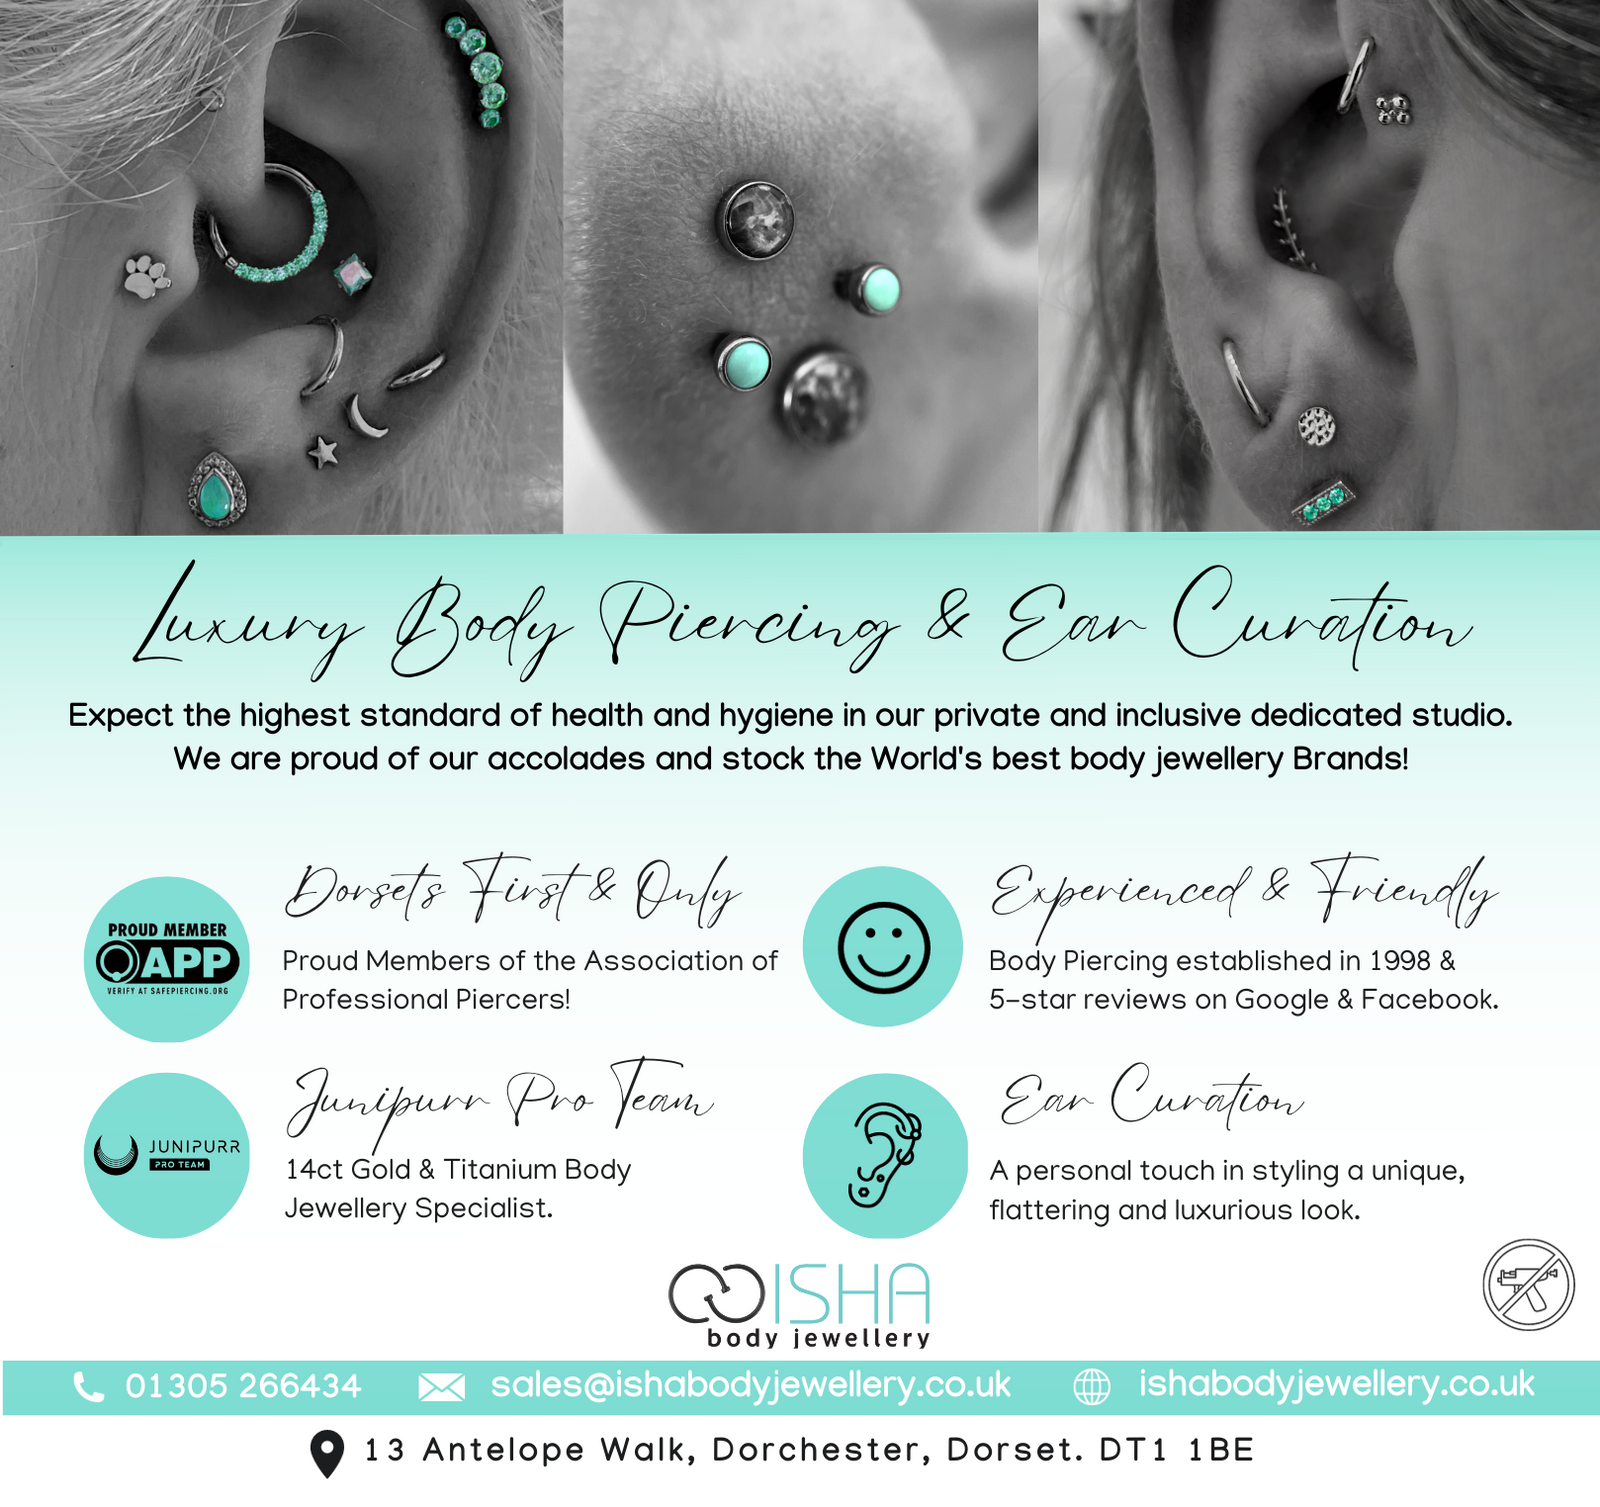 Top Body Jewelry Types: Ears, Noses and Hybrid Options Available –